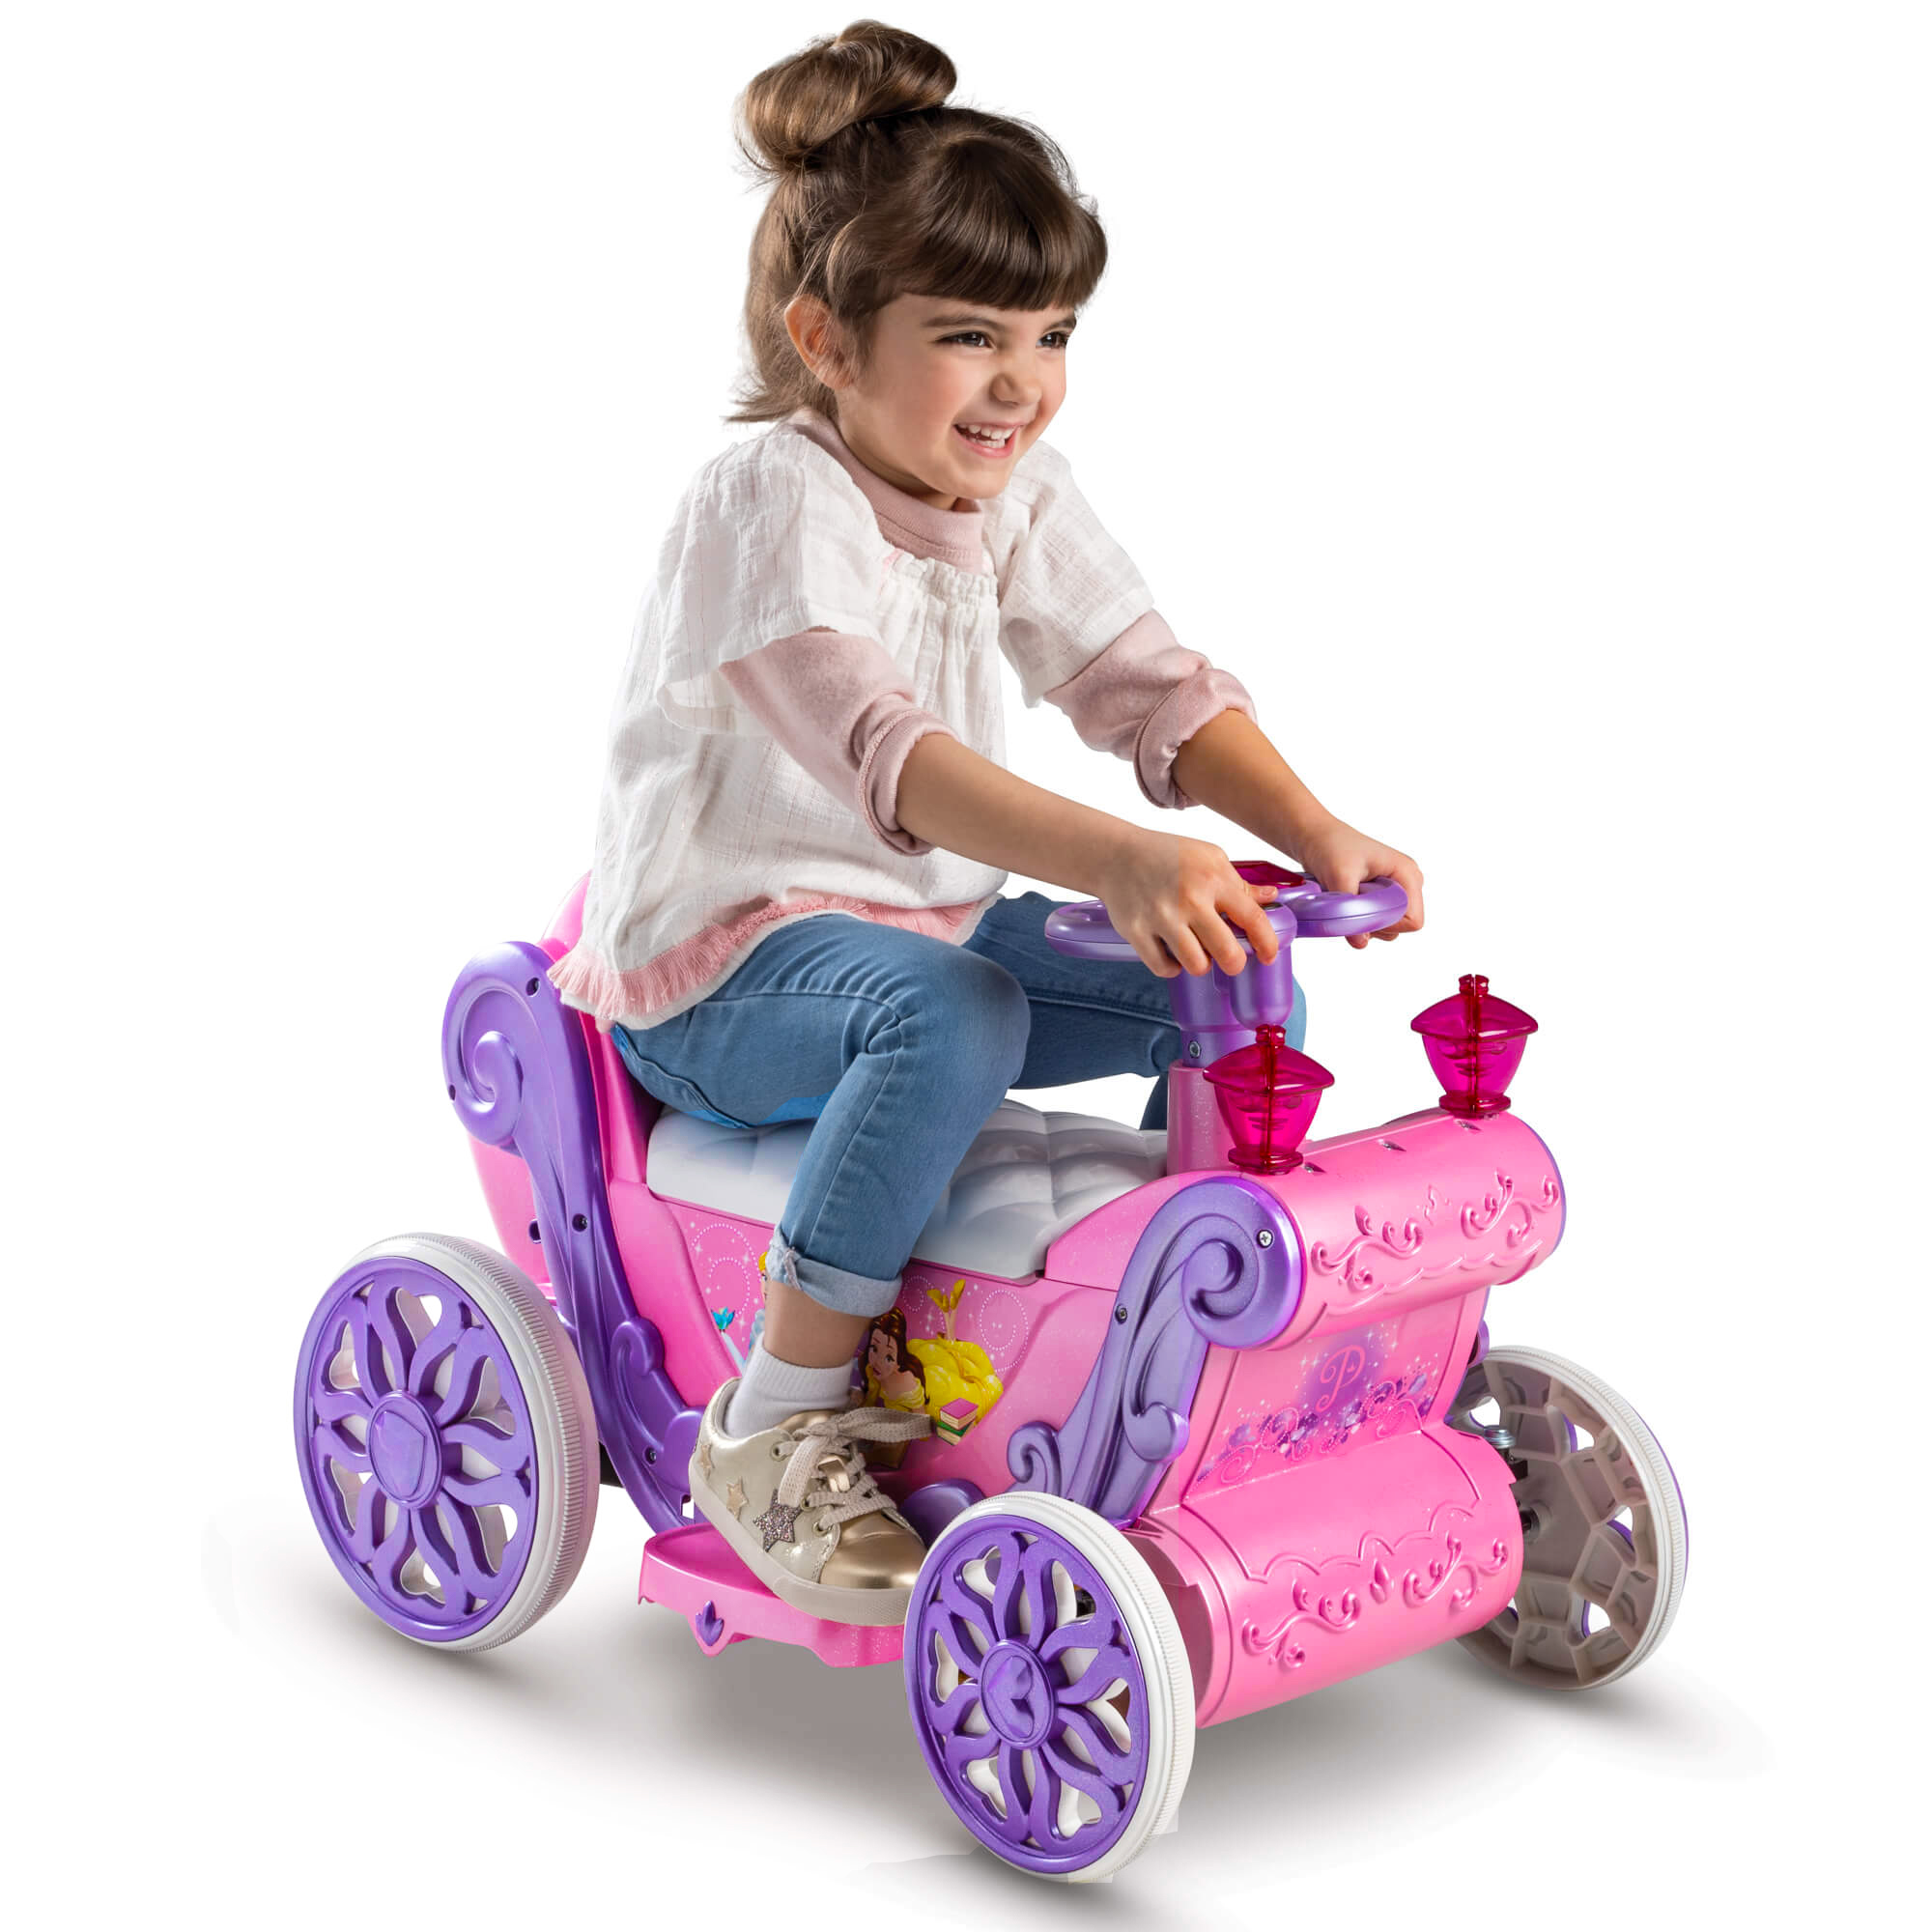 Disney Princess Girls’ 6V Battery-Powered Ride-On Quad Toy by Huffy - image 1 of 10